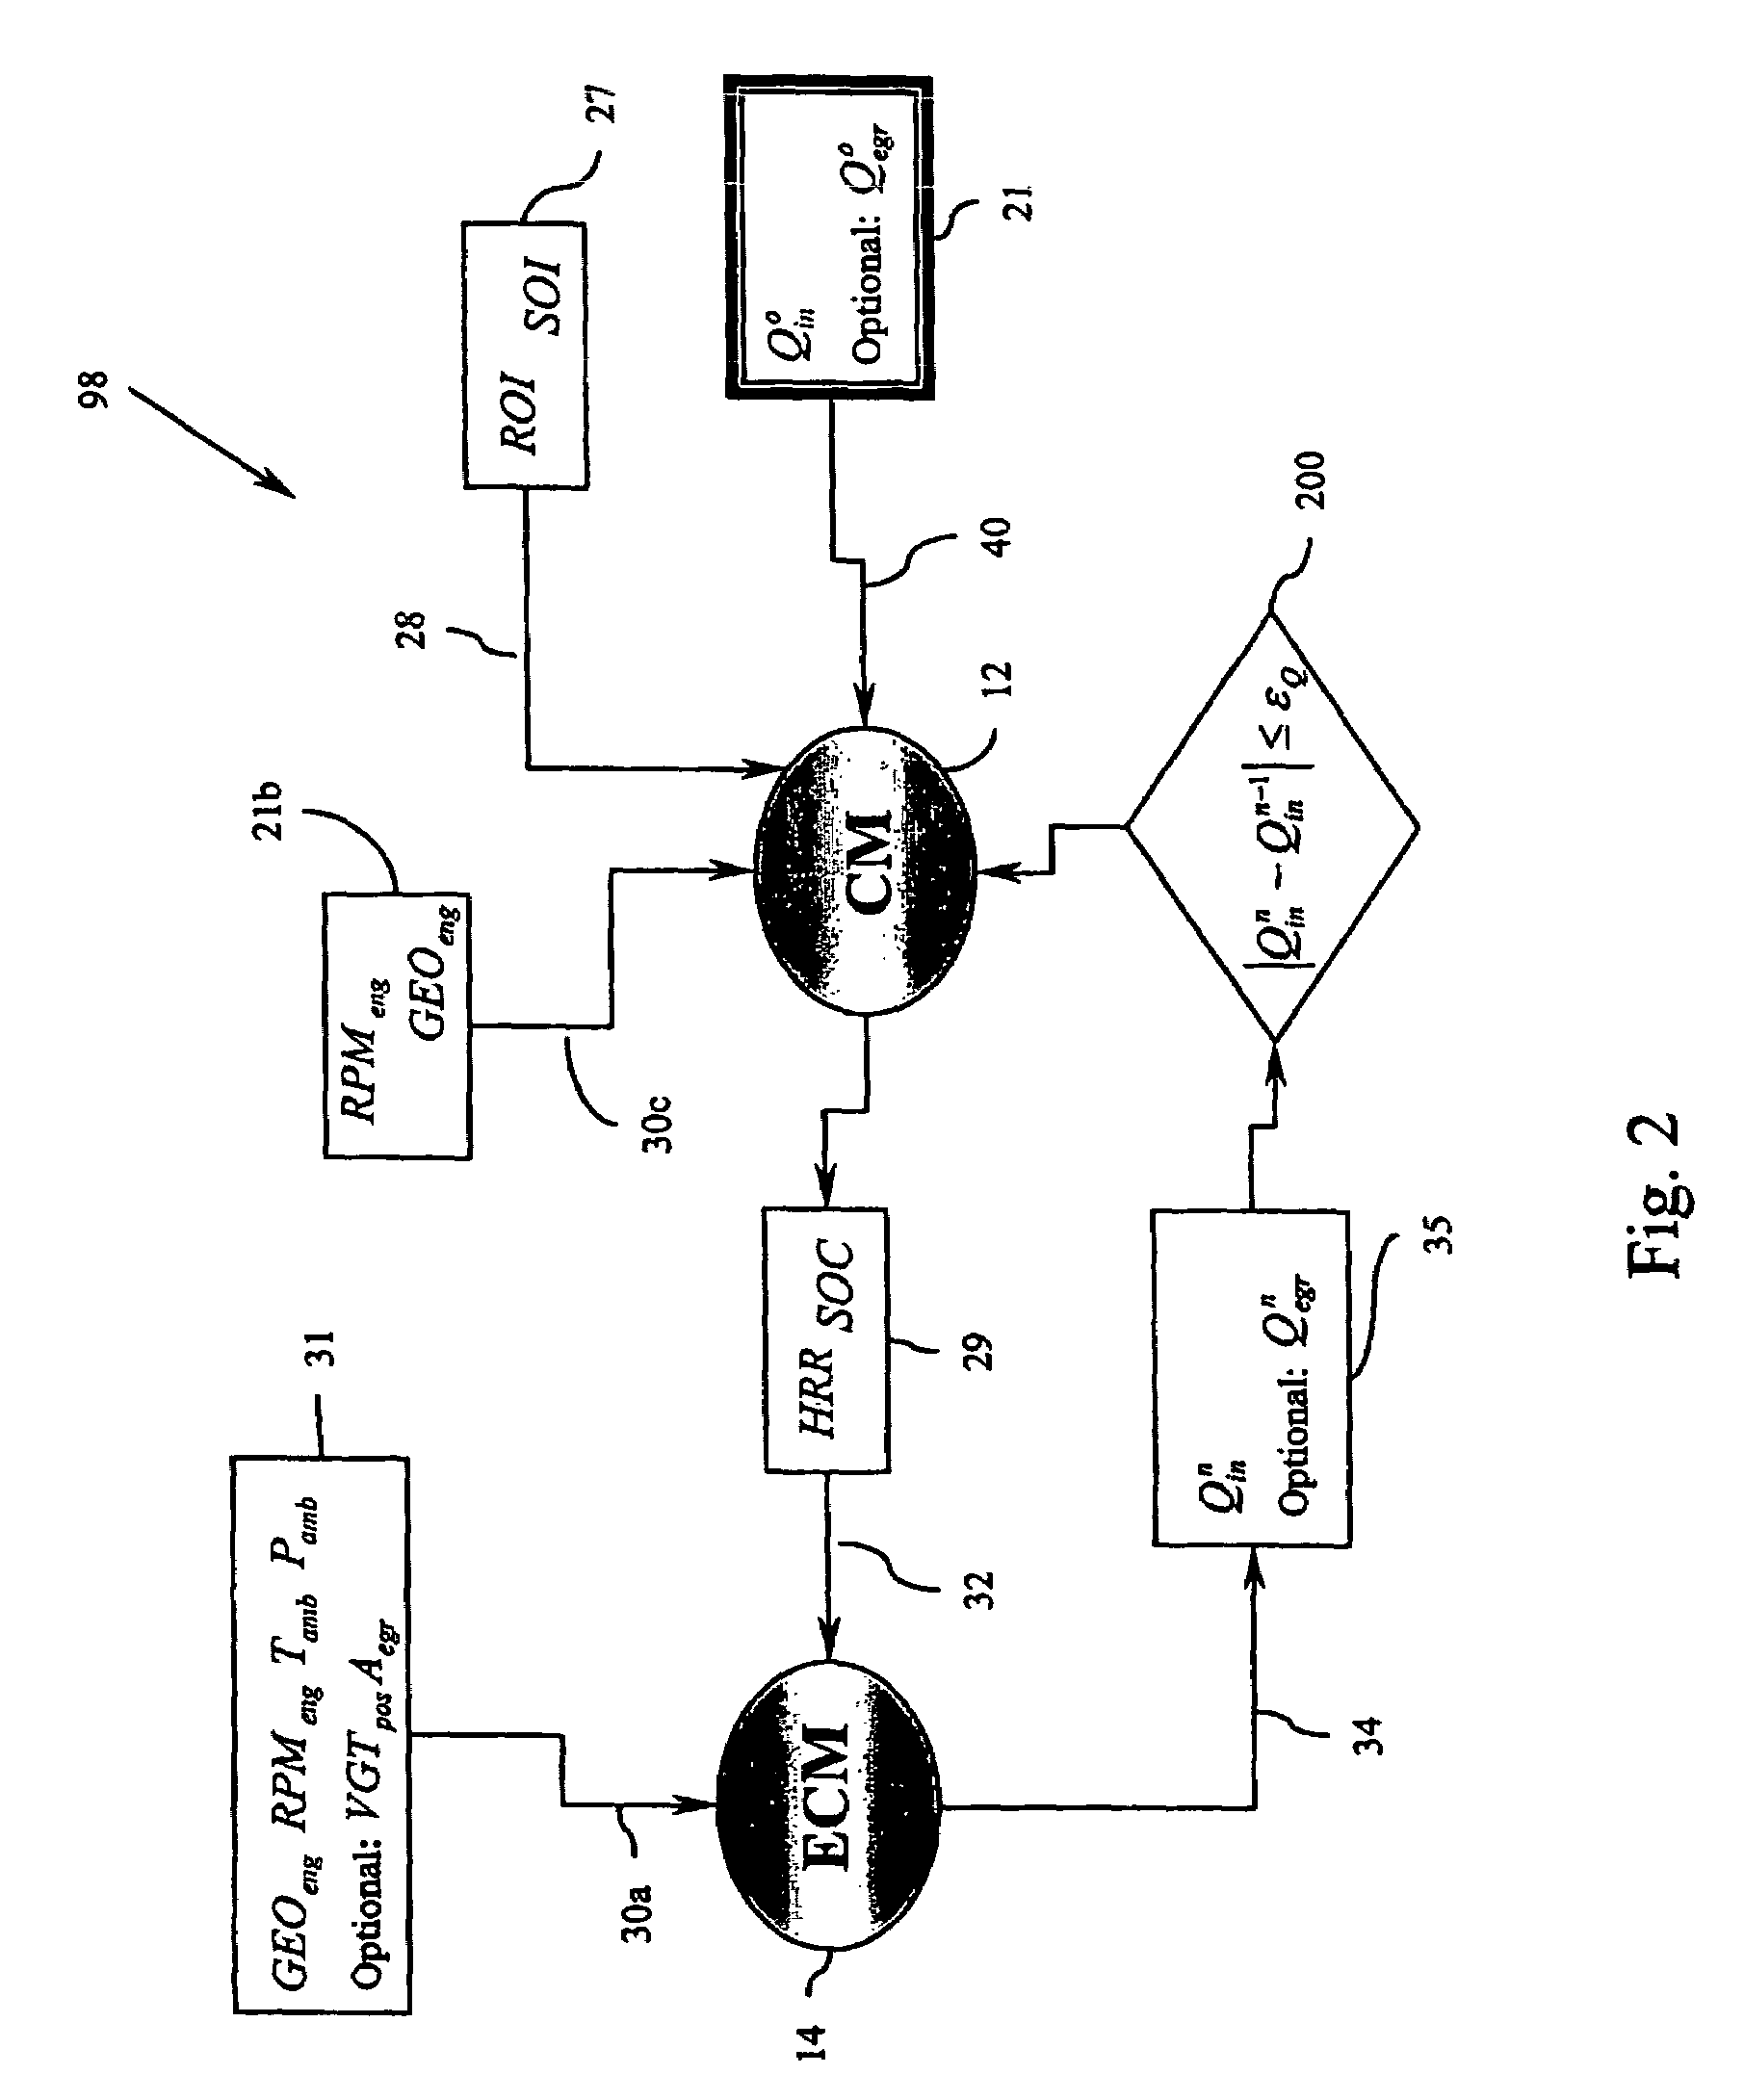 Method for controlling combustion in an internal combustion engine and predicting performance and emissions